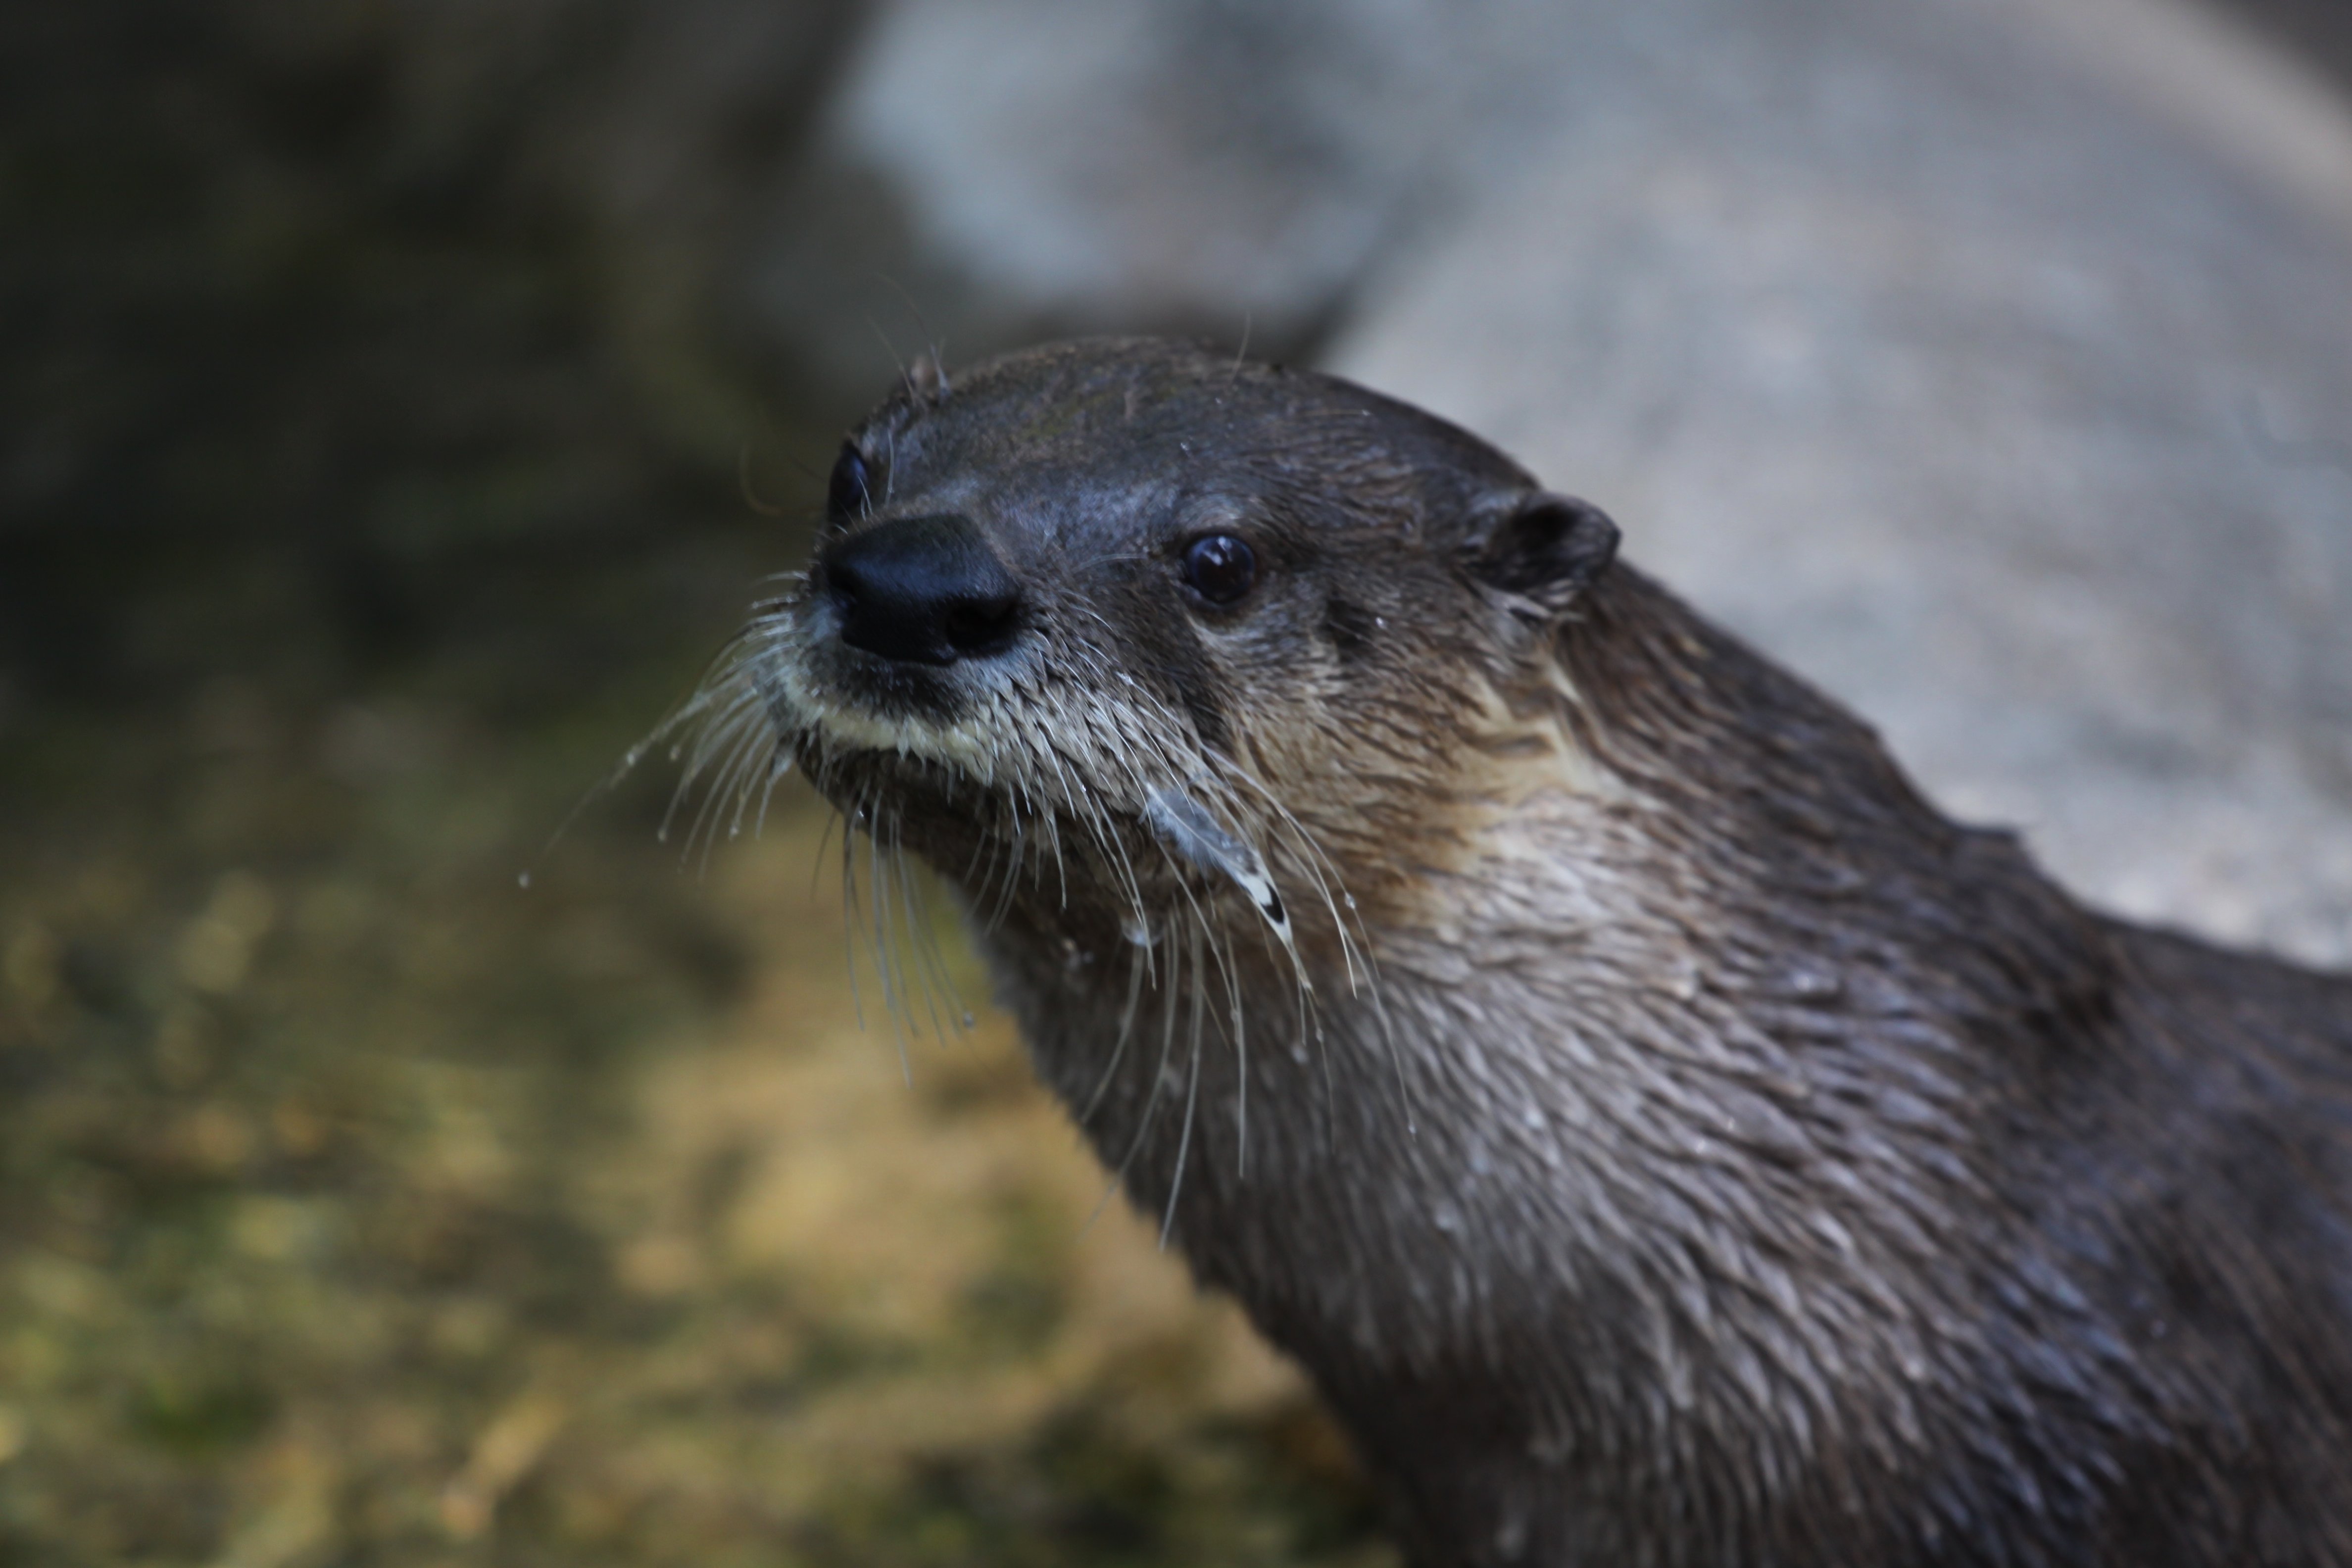 Head and shoulders of a North American River Otter, which is looking slightly towards the camera